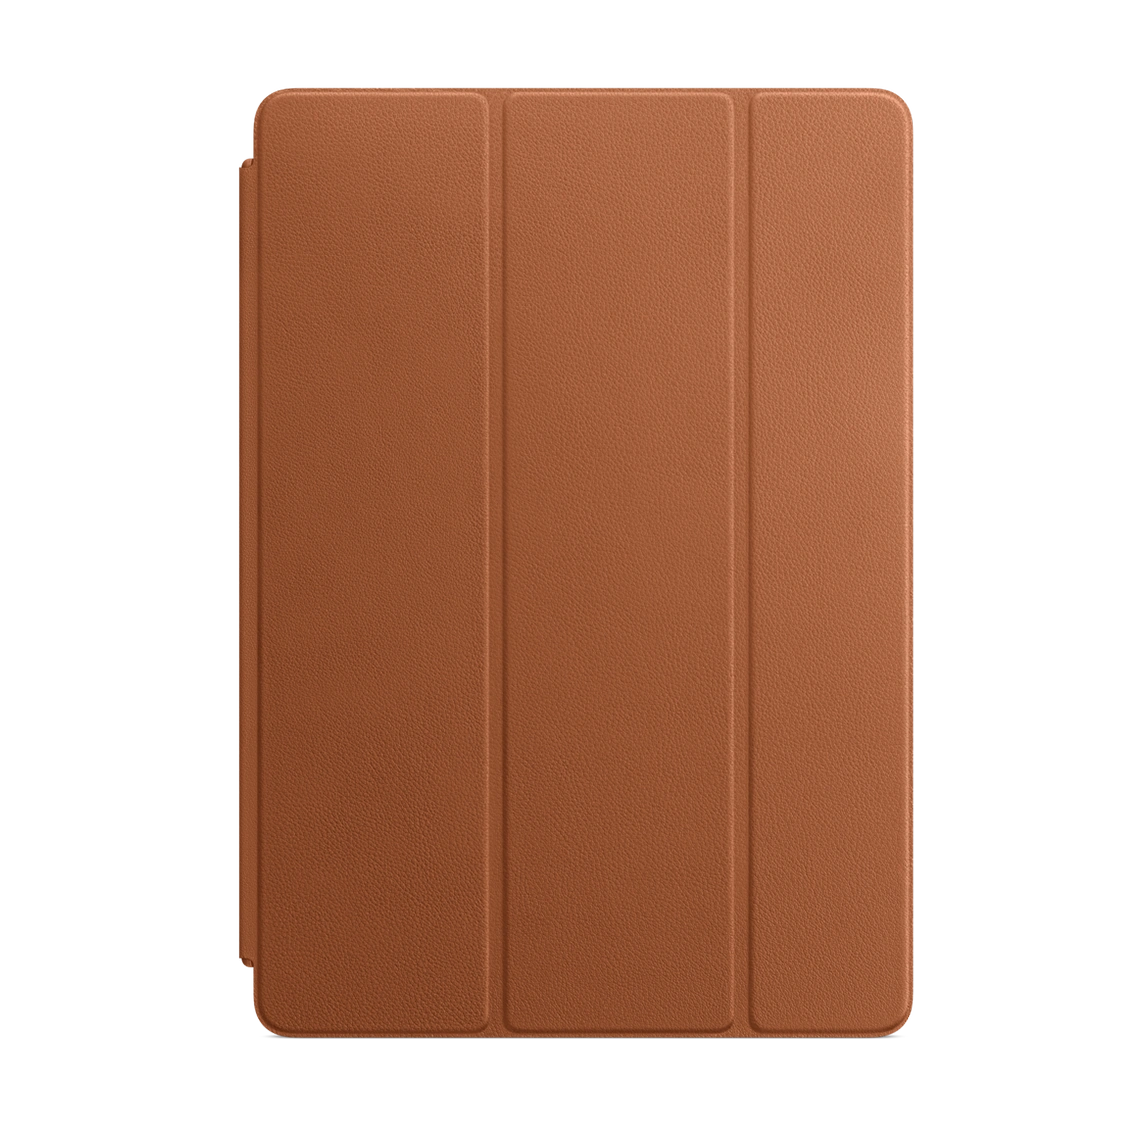 Apple Leather Smart Cover for iPad Pro 12.9